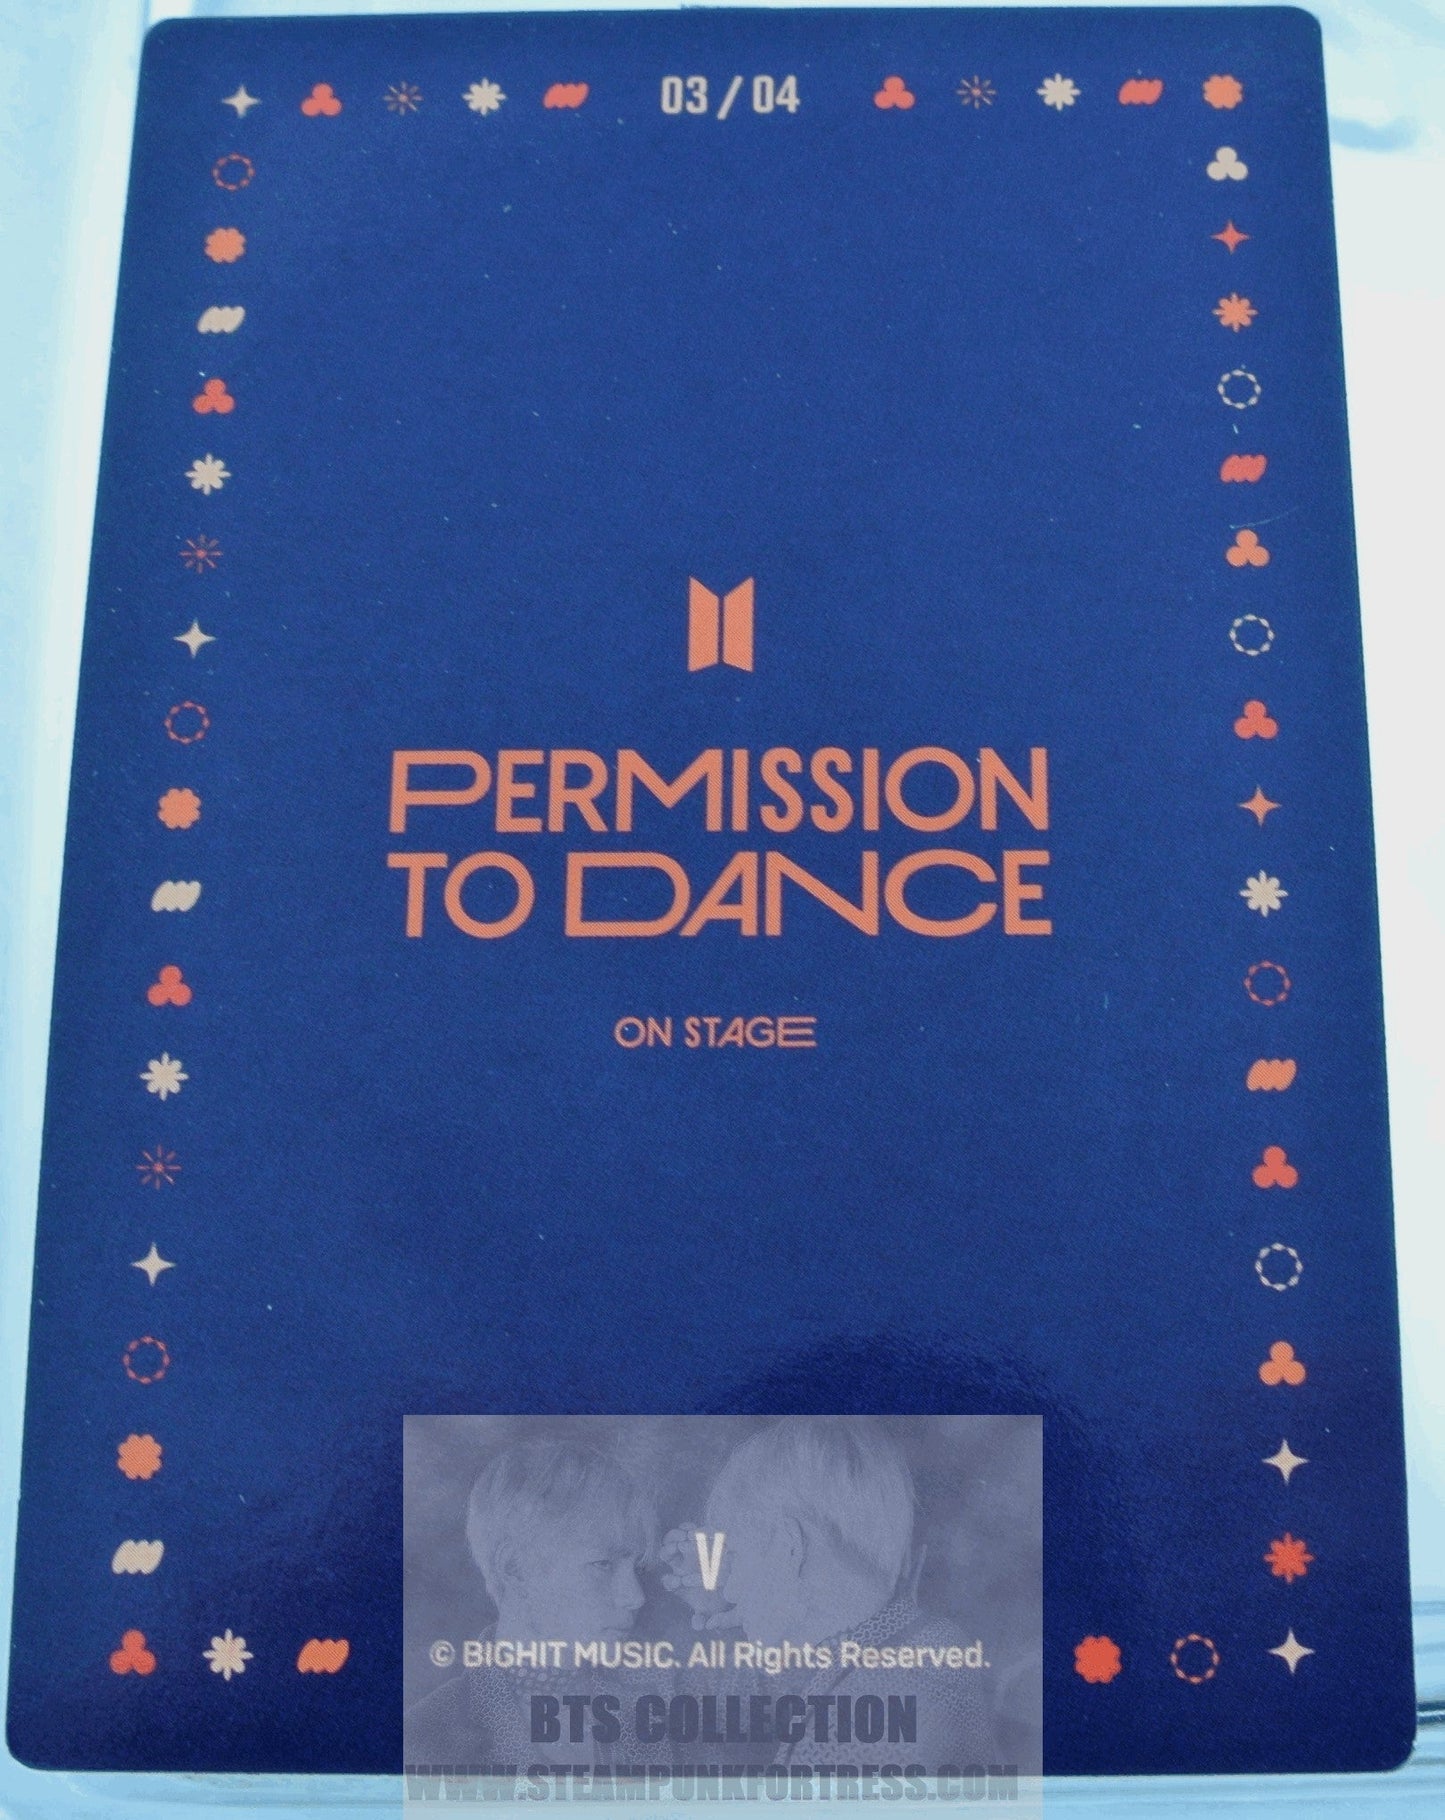 BTS V KIM TAEHYUNG TAE-HYUNG PTD 2022 PERMISSION TO DANCE ON STAGE SEOUL PTD #3 OF 4 PHOTOCARD PHOTO CARD NEW OFFICIAL MERCHANDISE